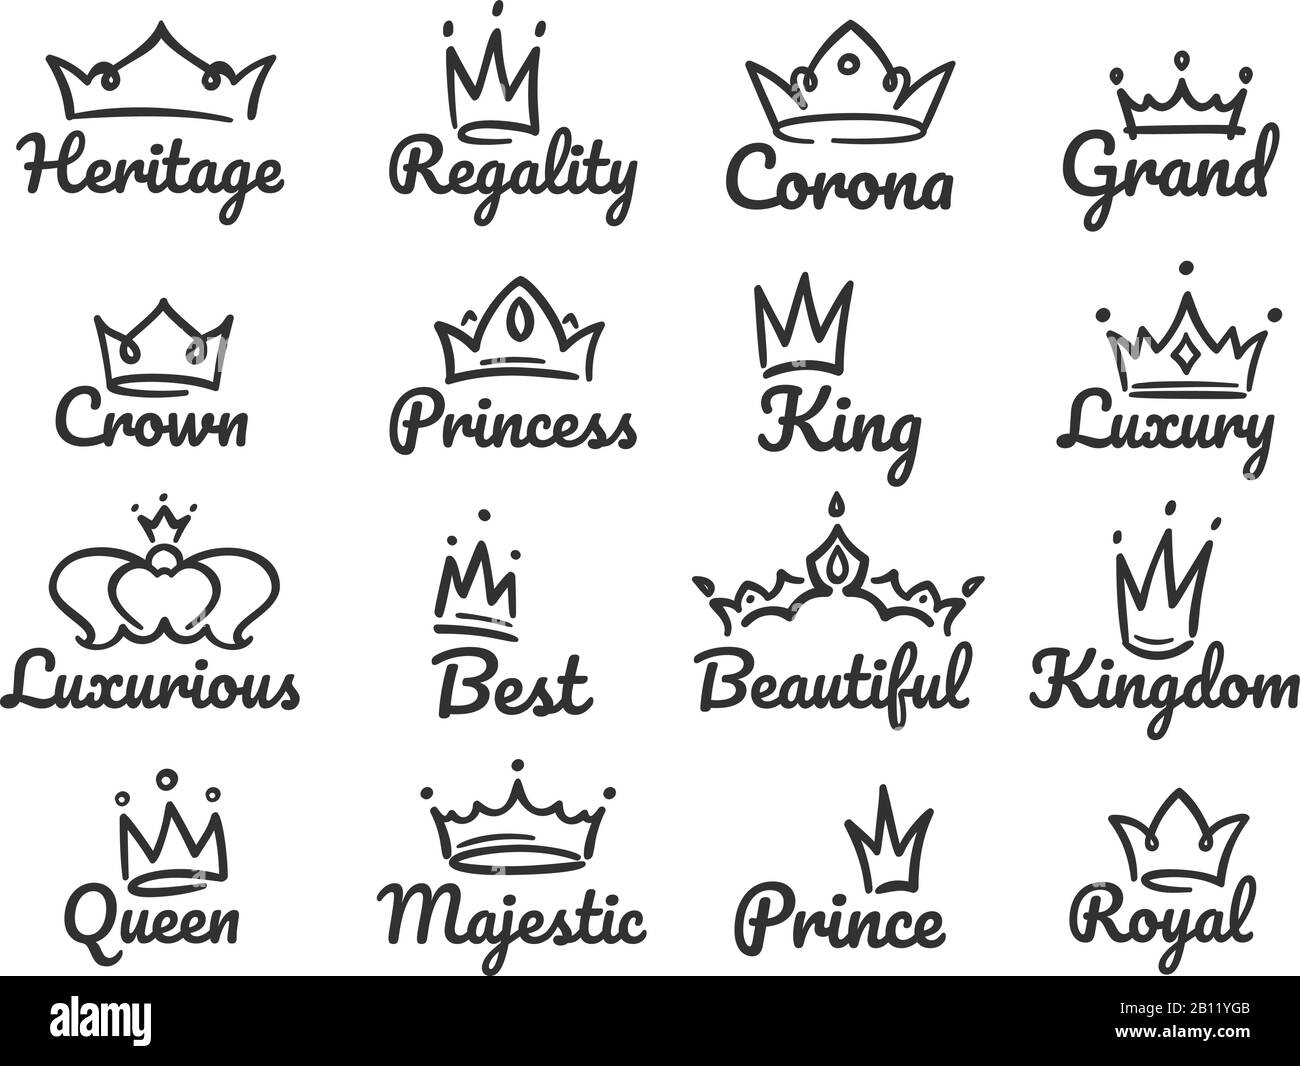 Black And White Queen Crown Wallpaper